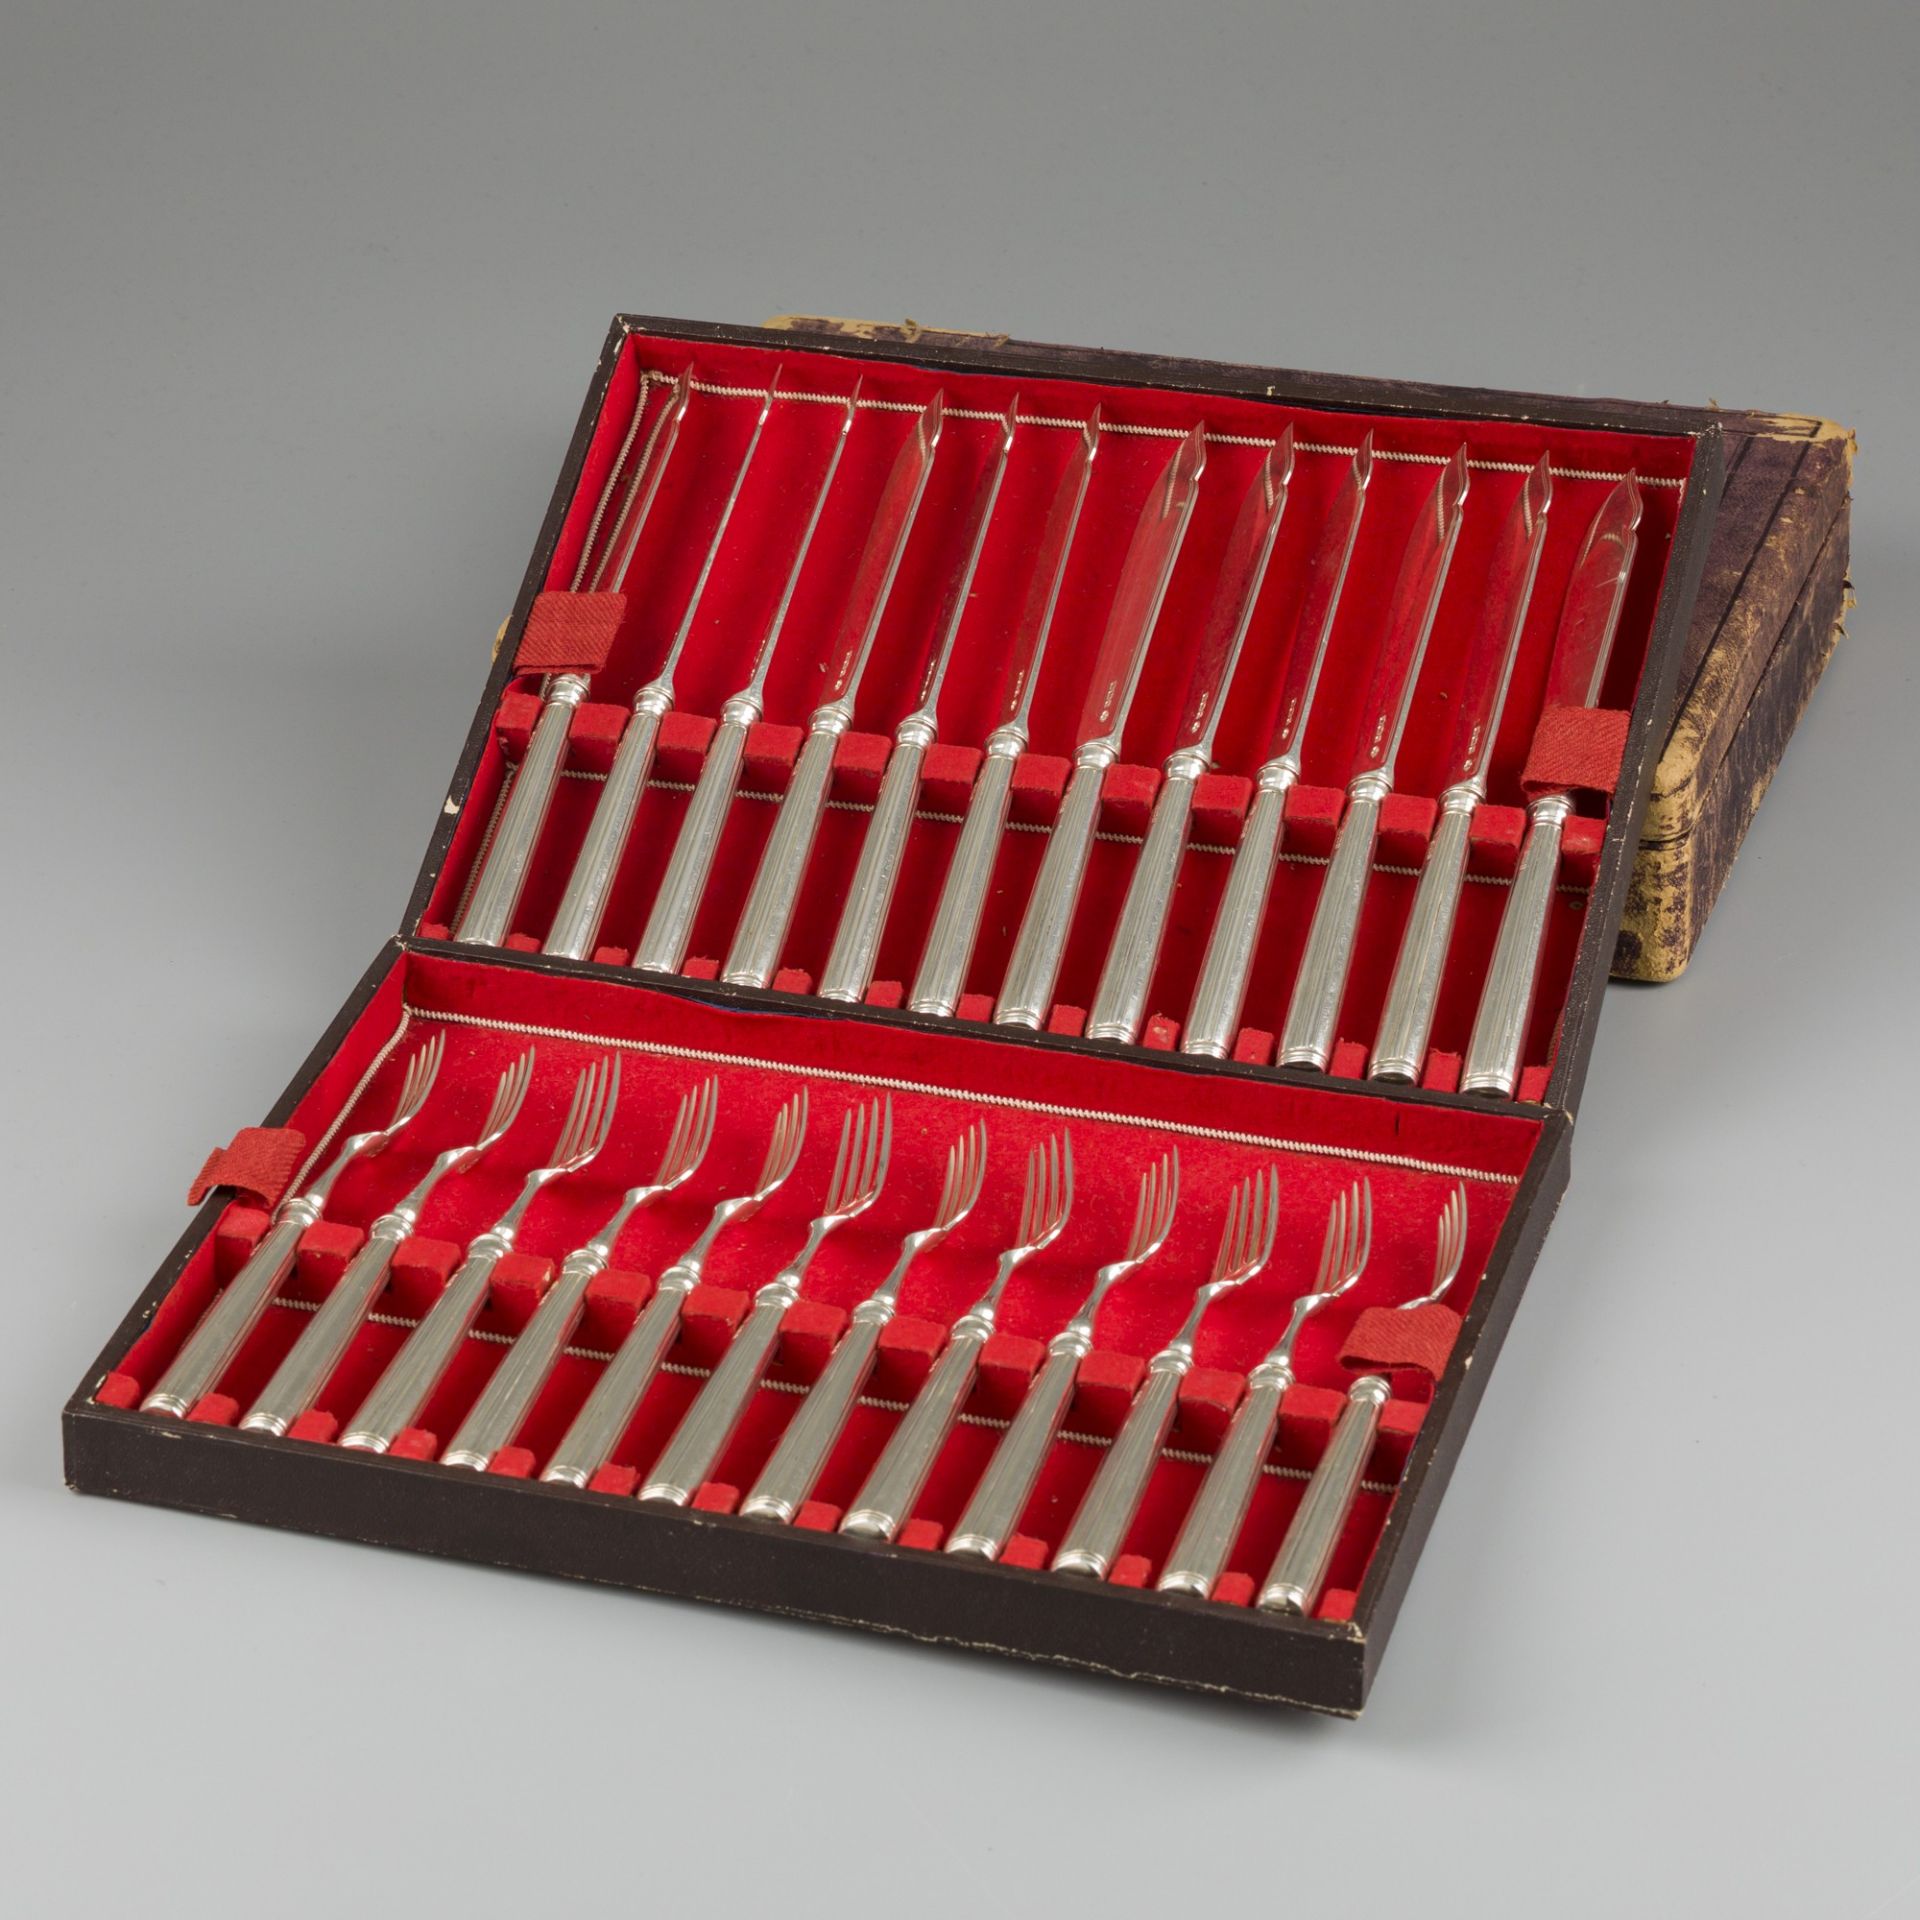 24-piece set fish cutlery, silver. - Image 2 of 12